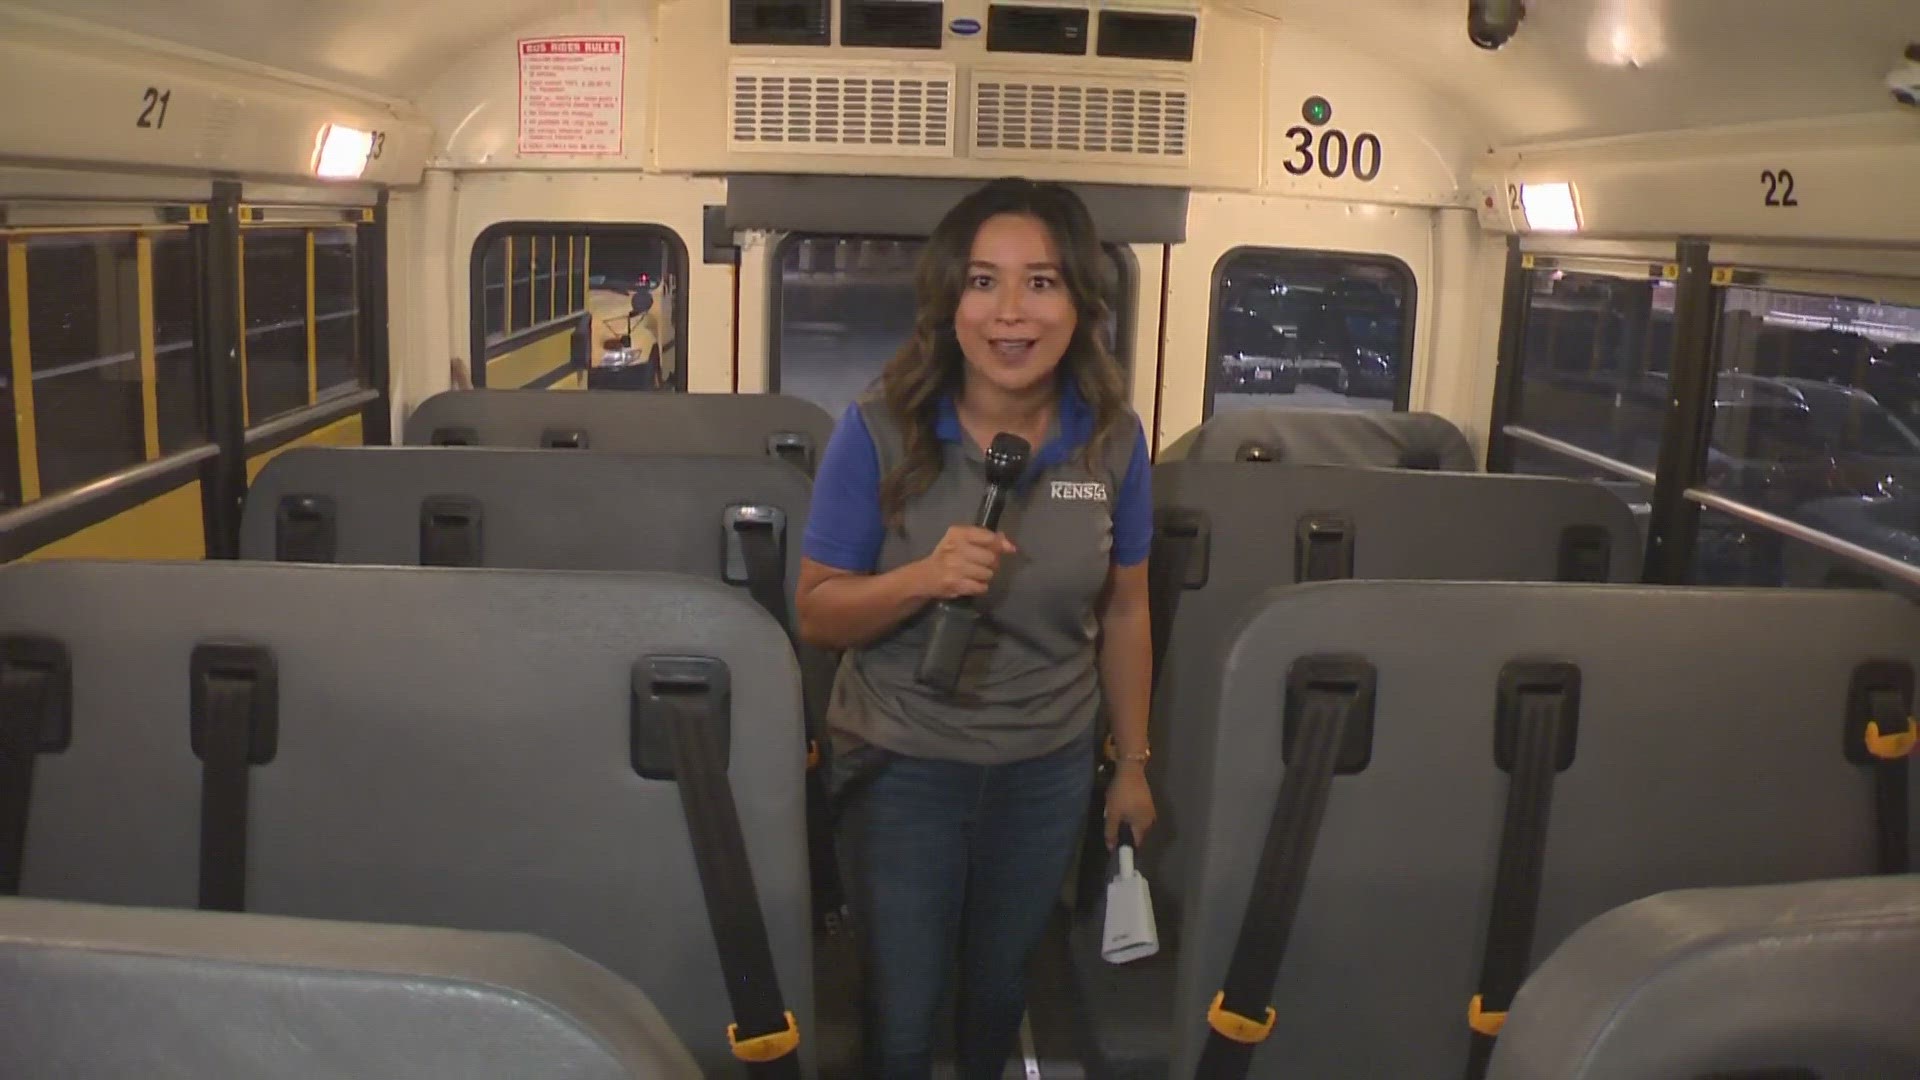 The district says it has about 88 bus routes, so the drivers will be very busy this school year.